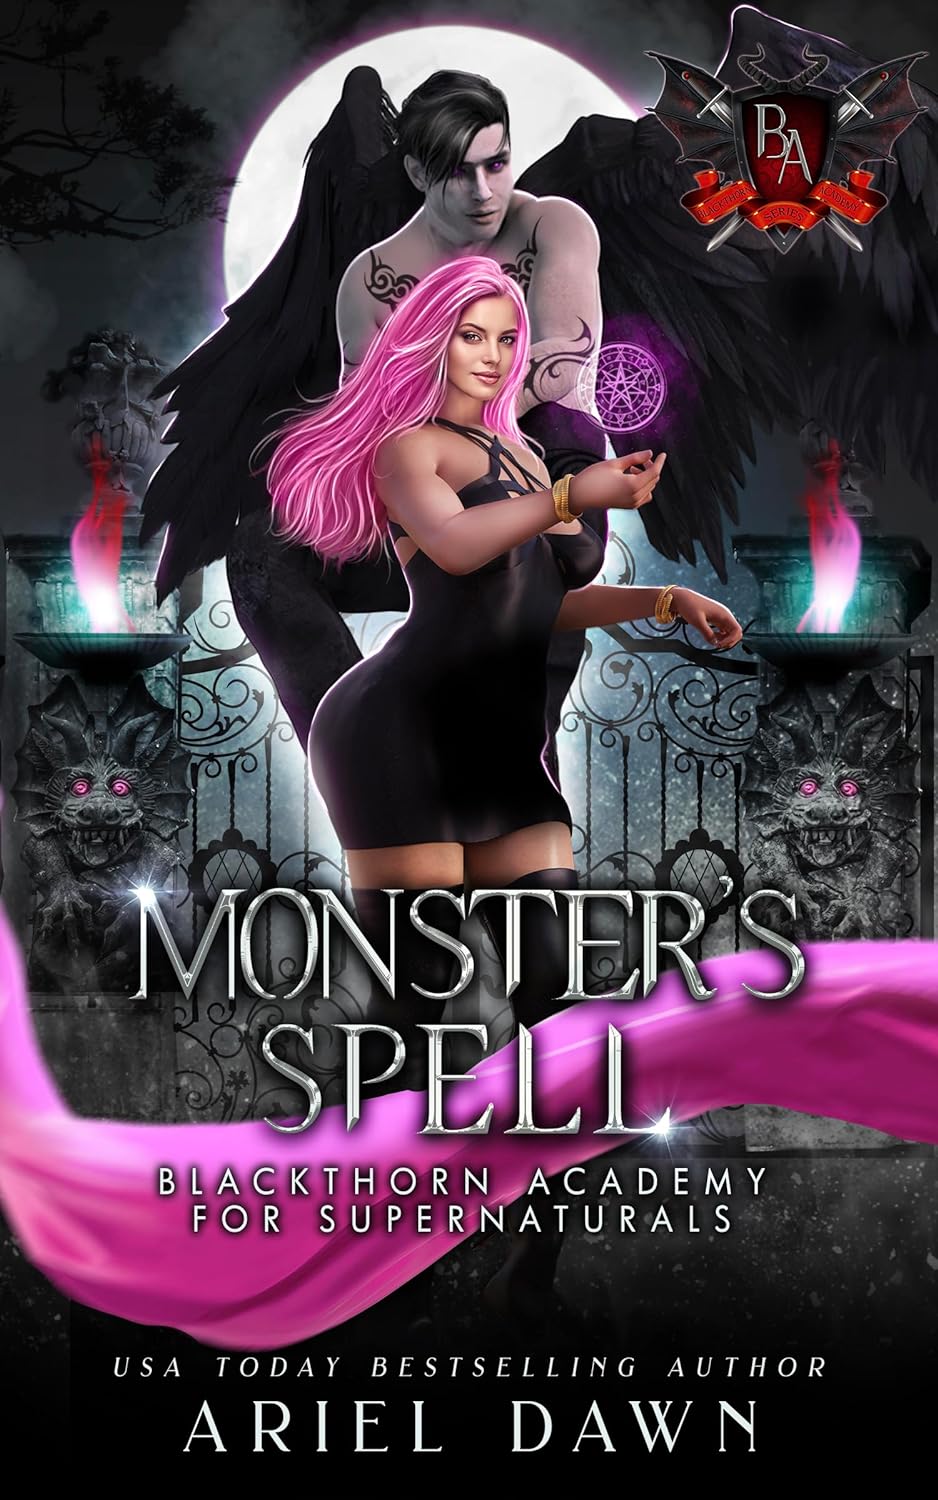 Monster's Spell by Ariel Dawn